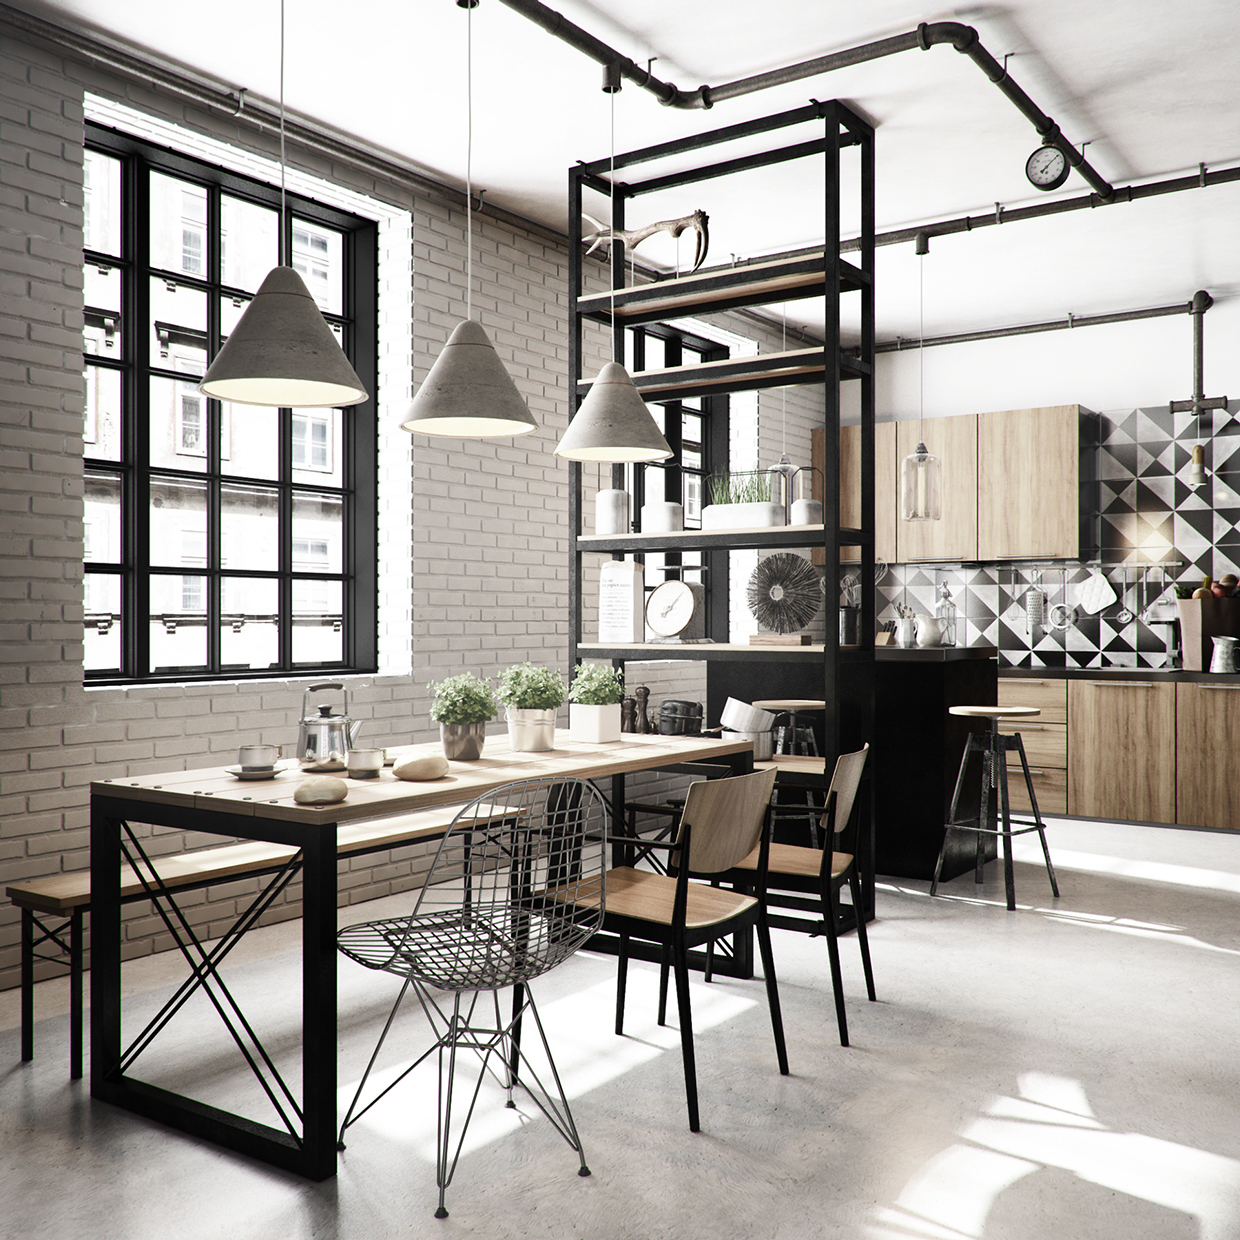 Monochrome Style Dining Room